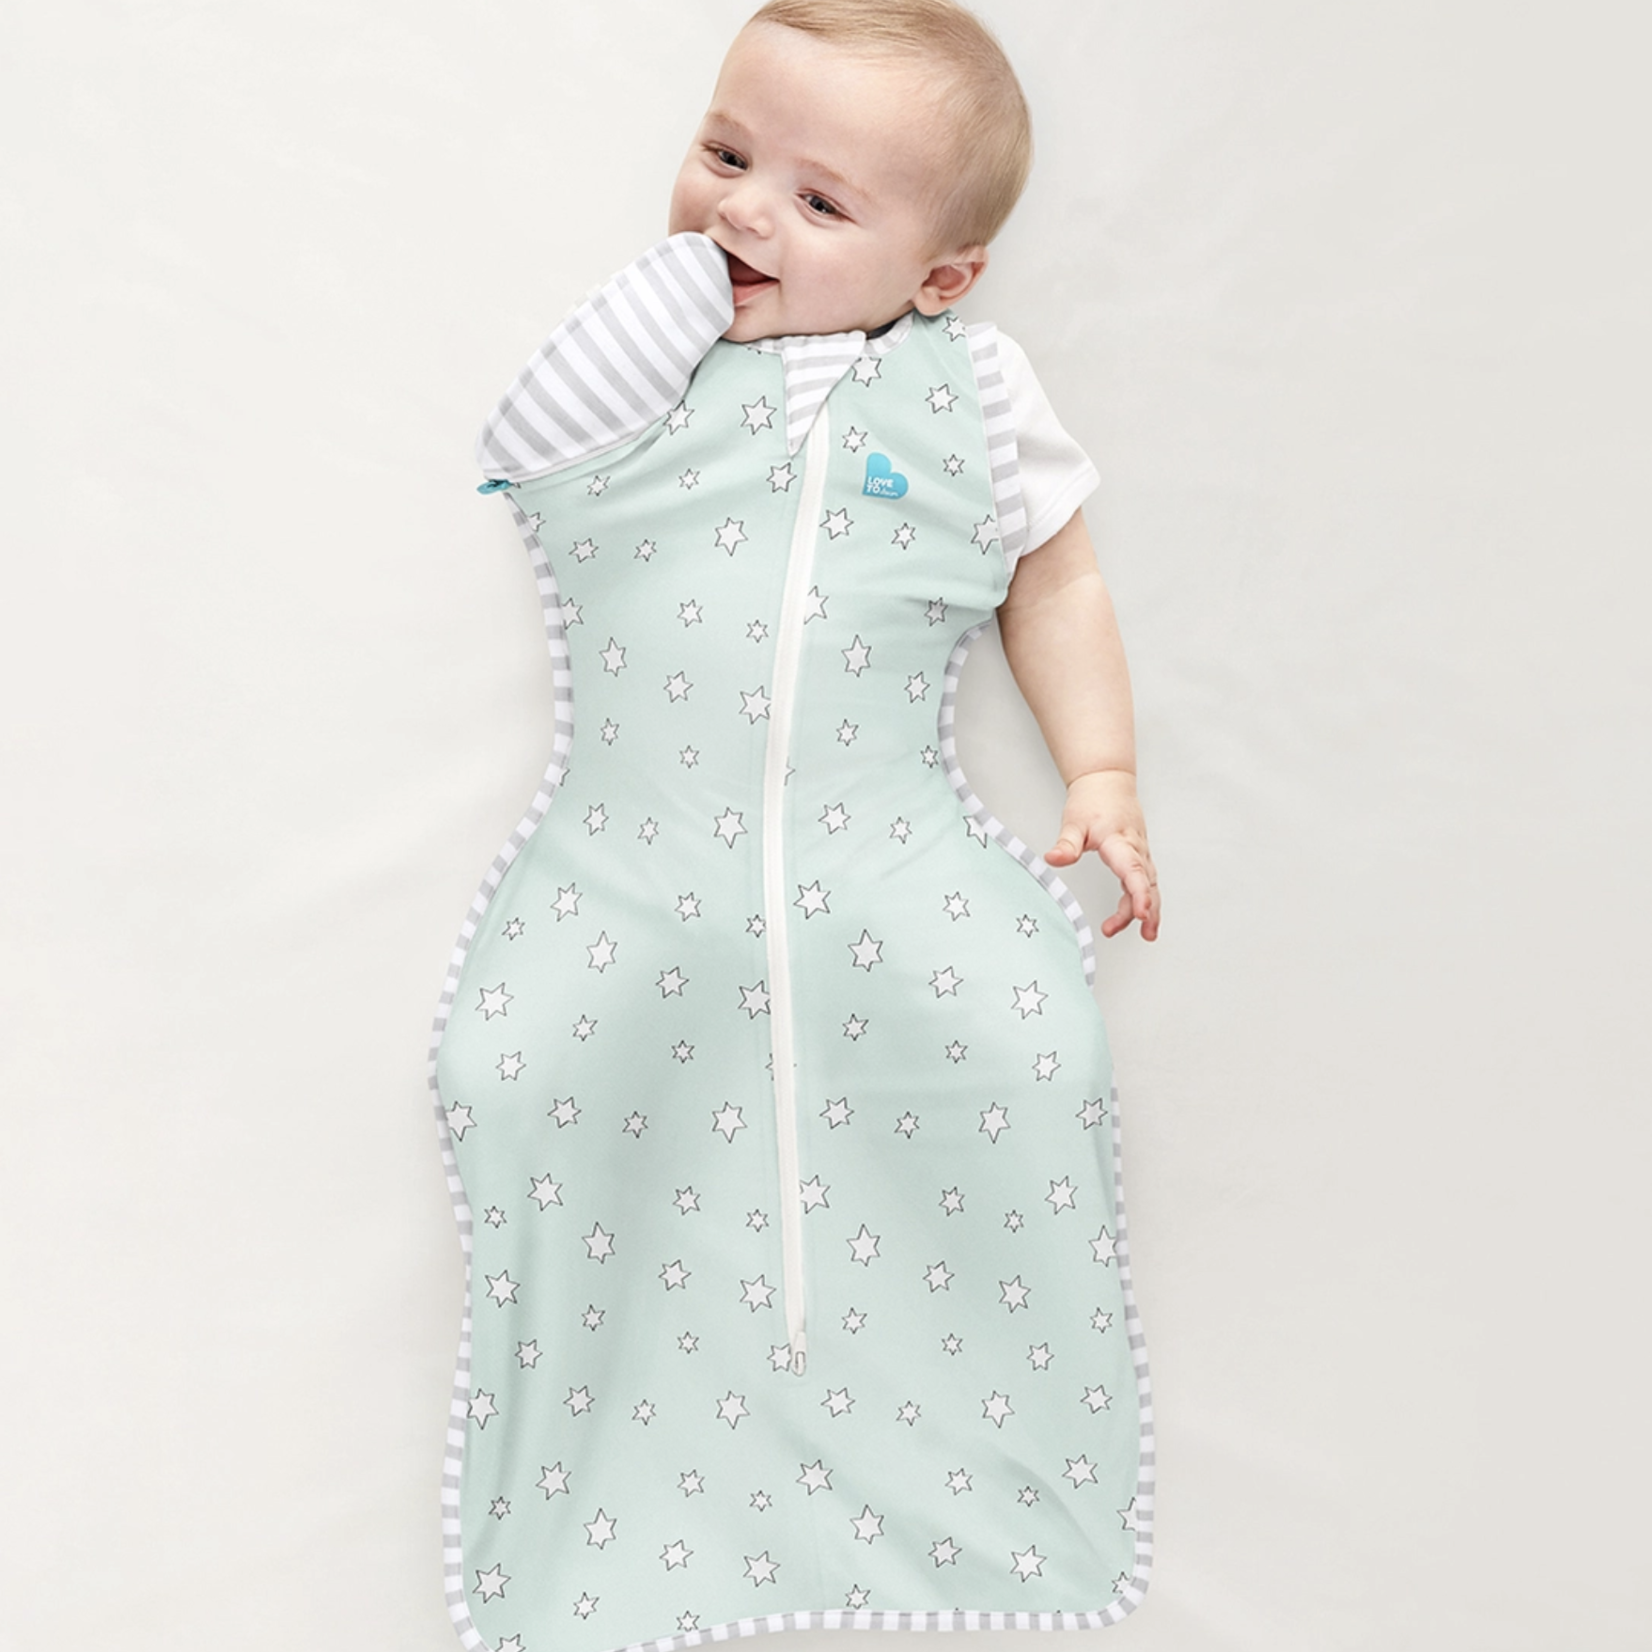 Love To Dream SWADDLE UP™ Transition Bag Bamboo 0.2T-Mint Superstar